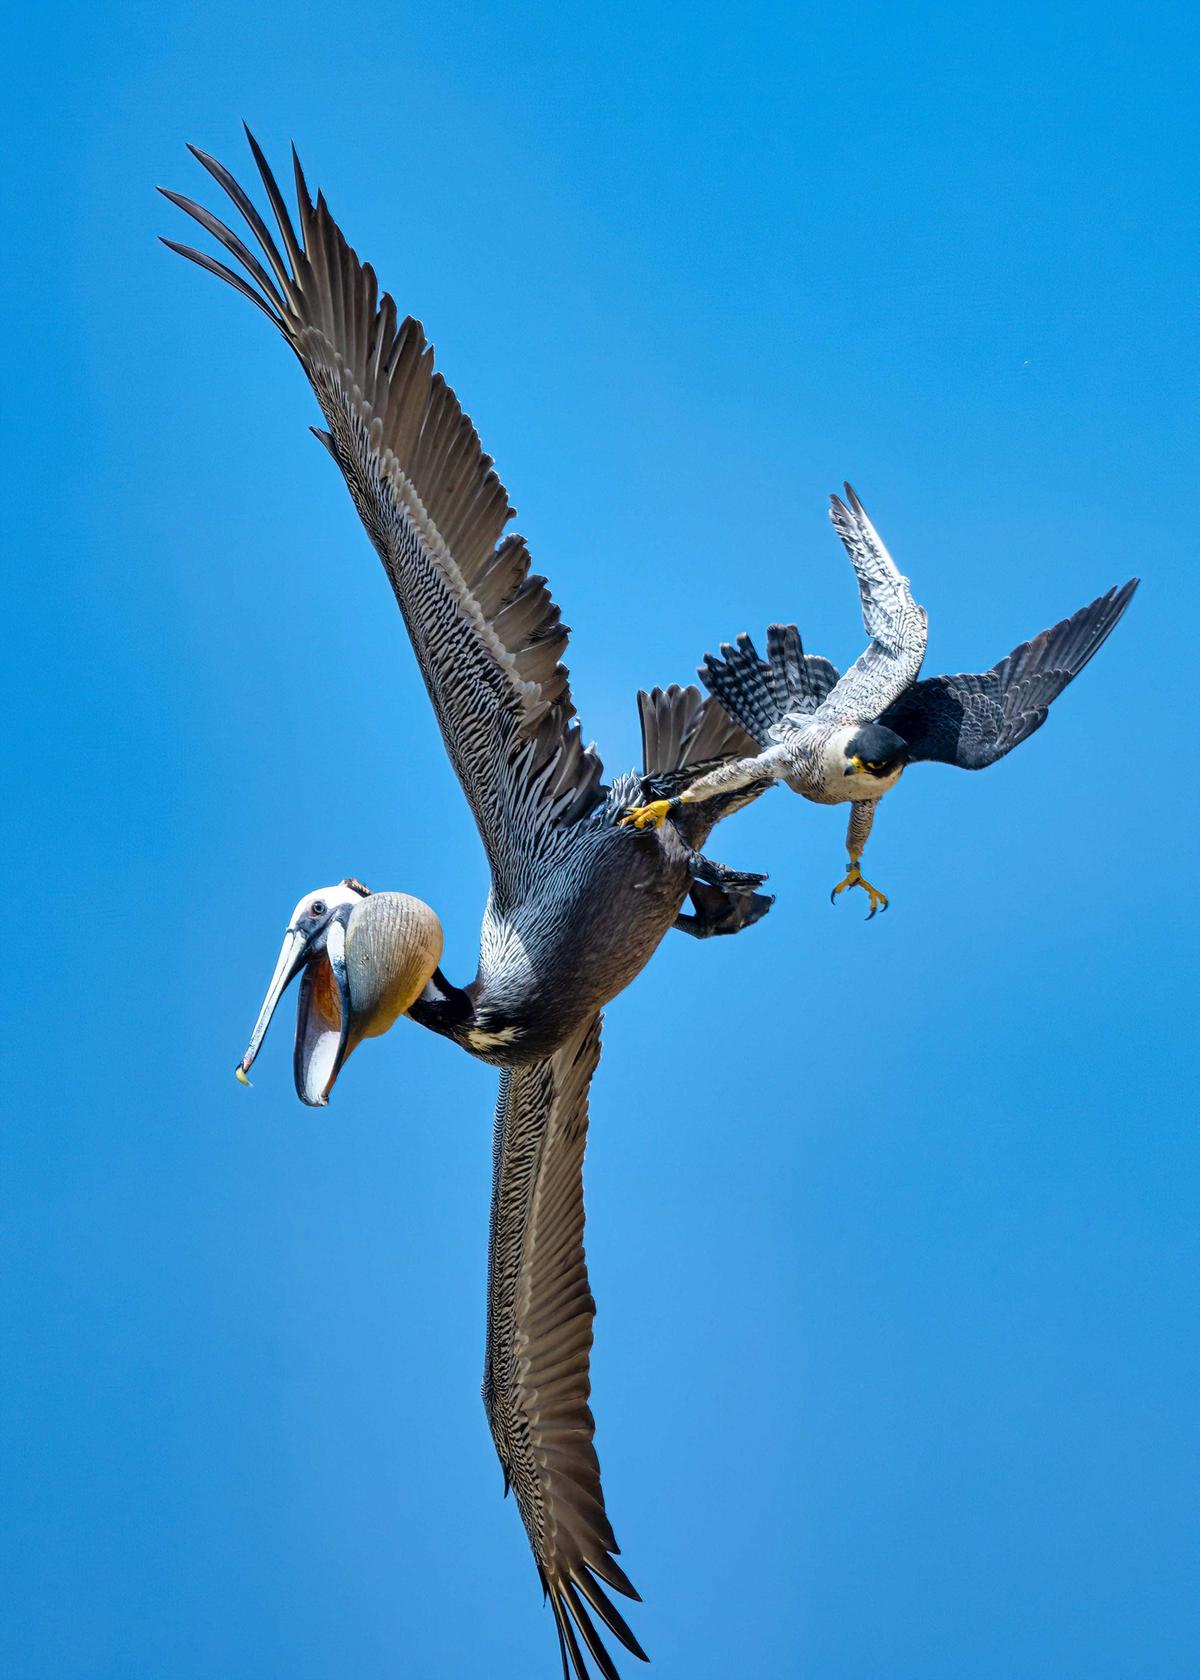 The peregrine falcon grasps the brown pelican with its razor-sharp talons. (SWNS)